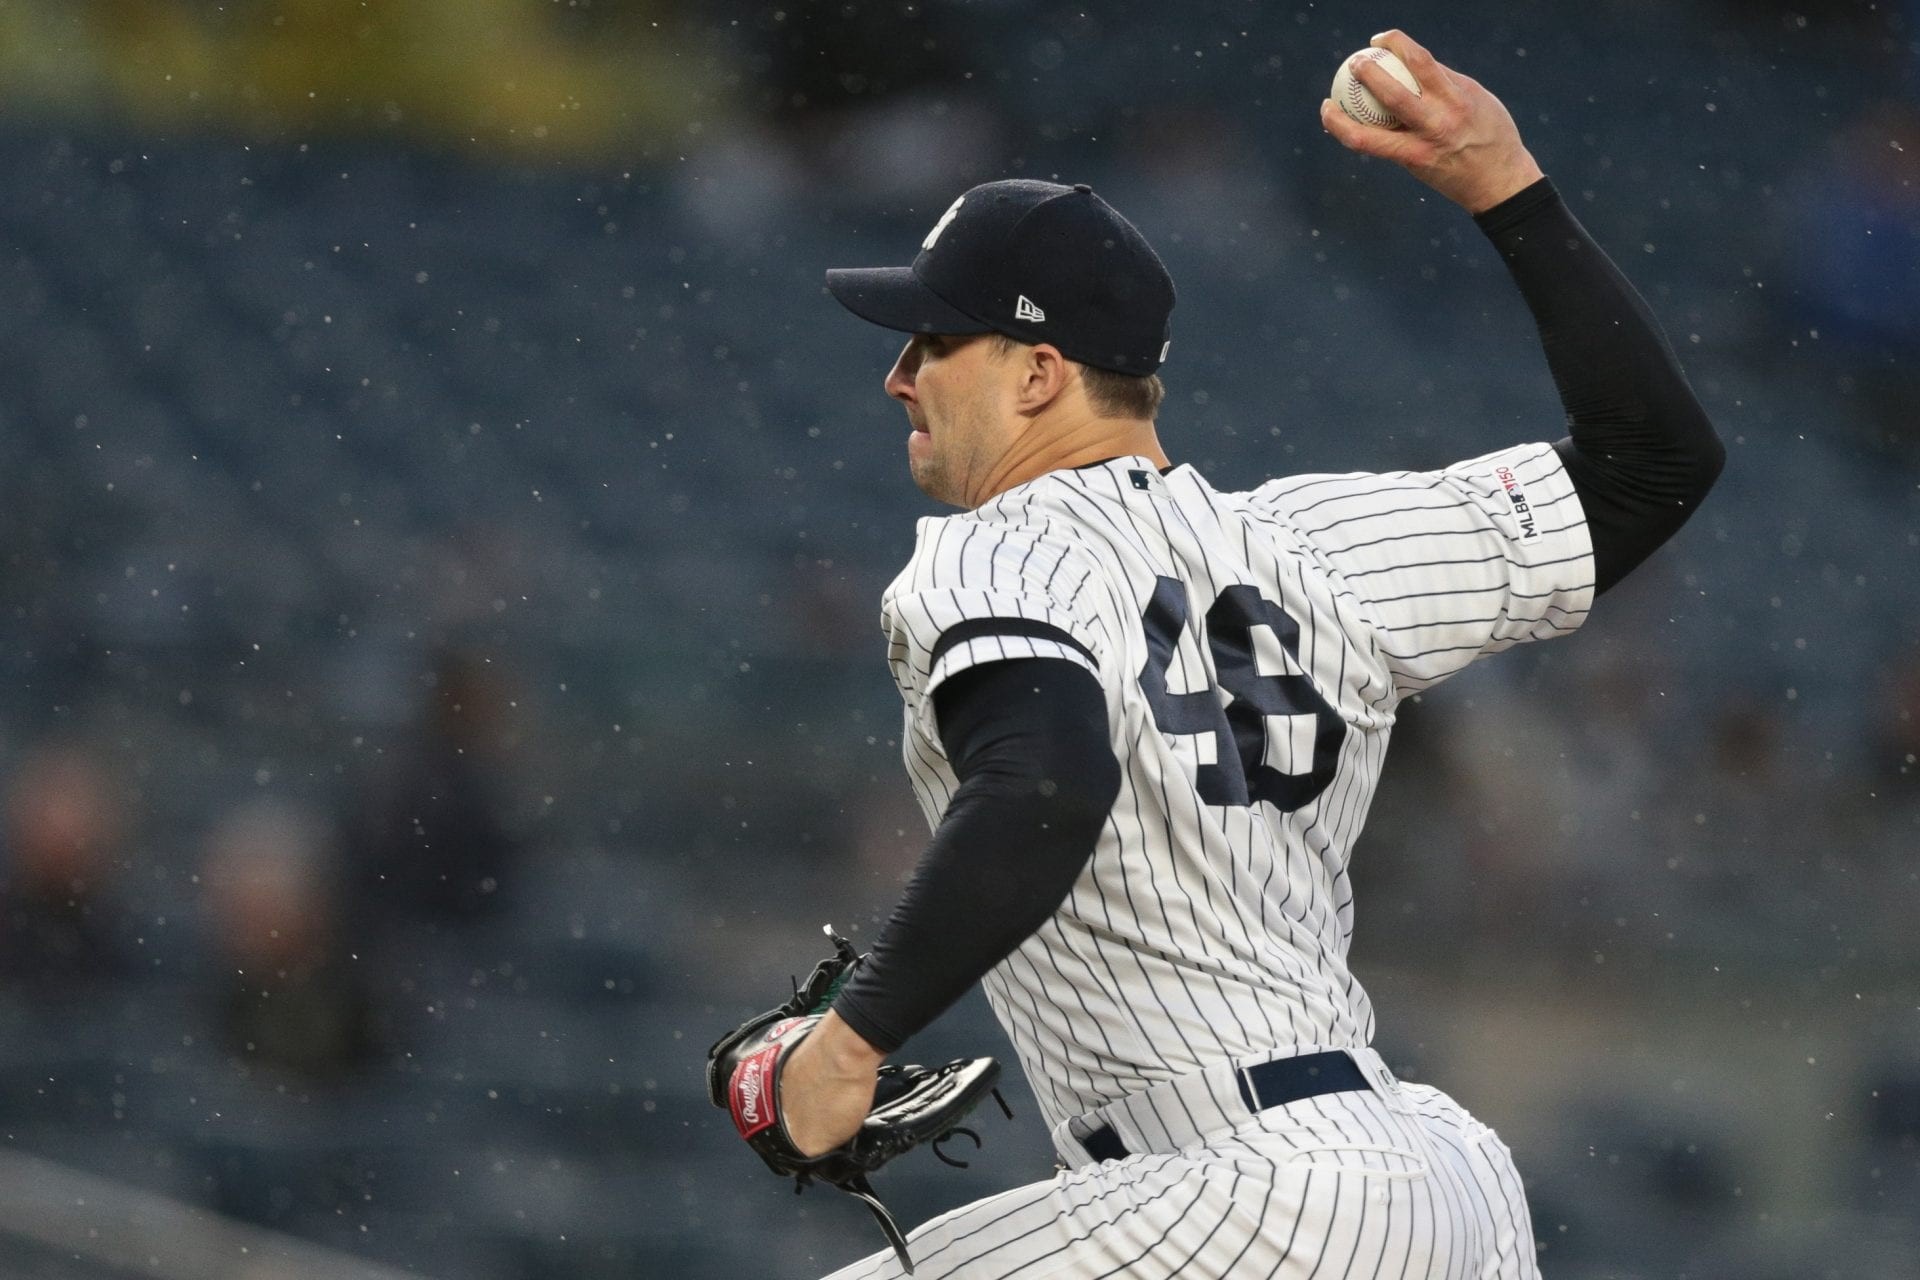 New York Yankees reliever undergoes Tommy John surgery